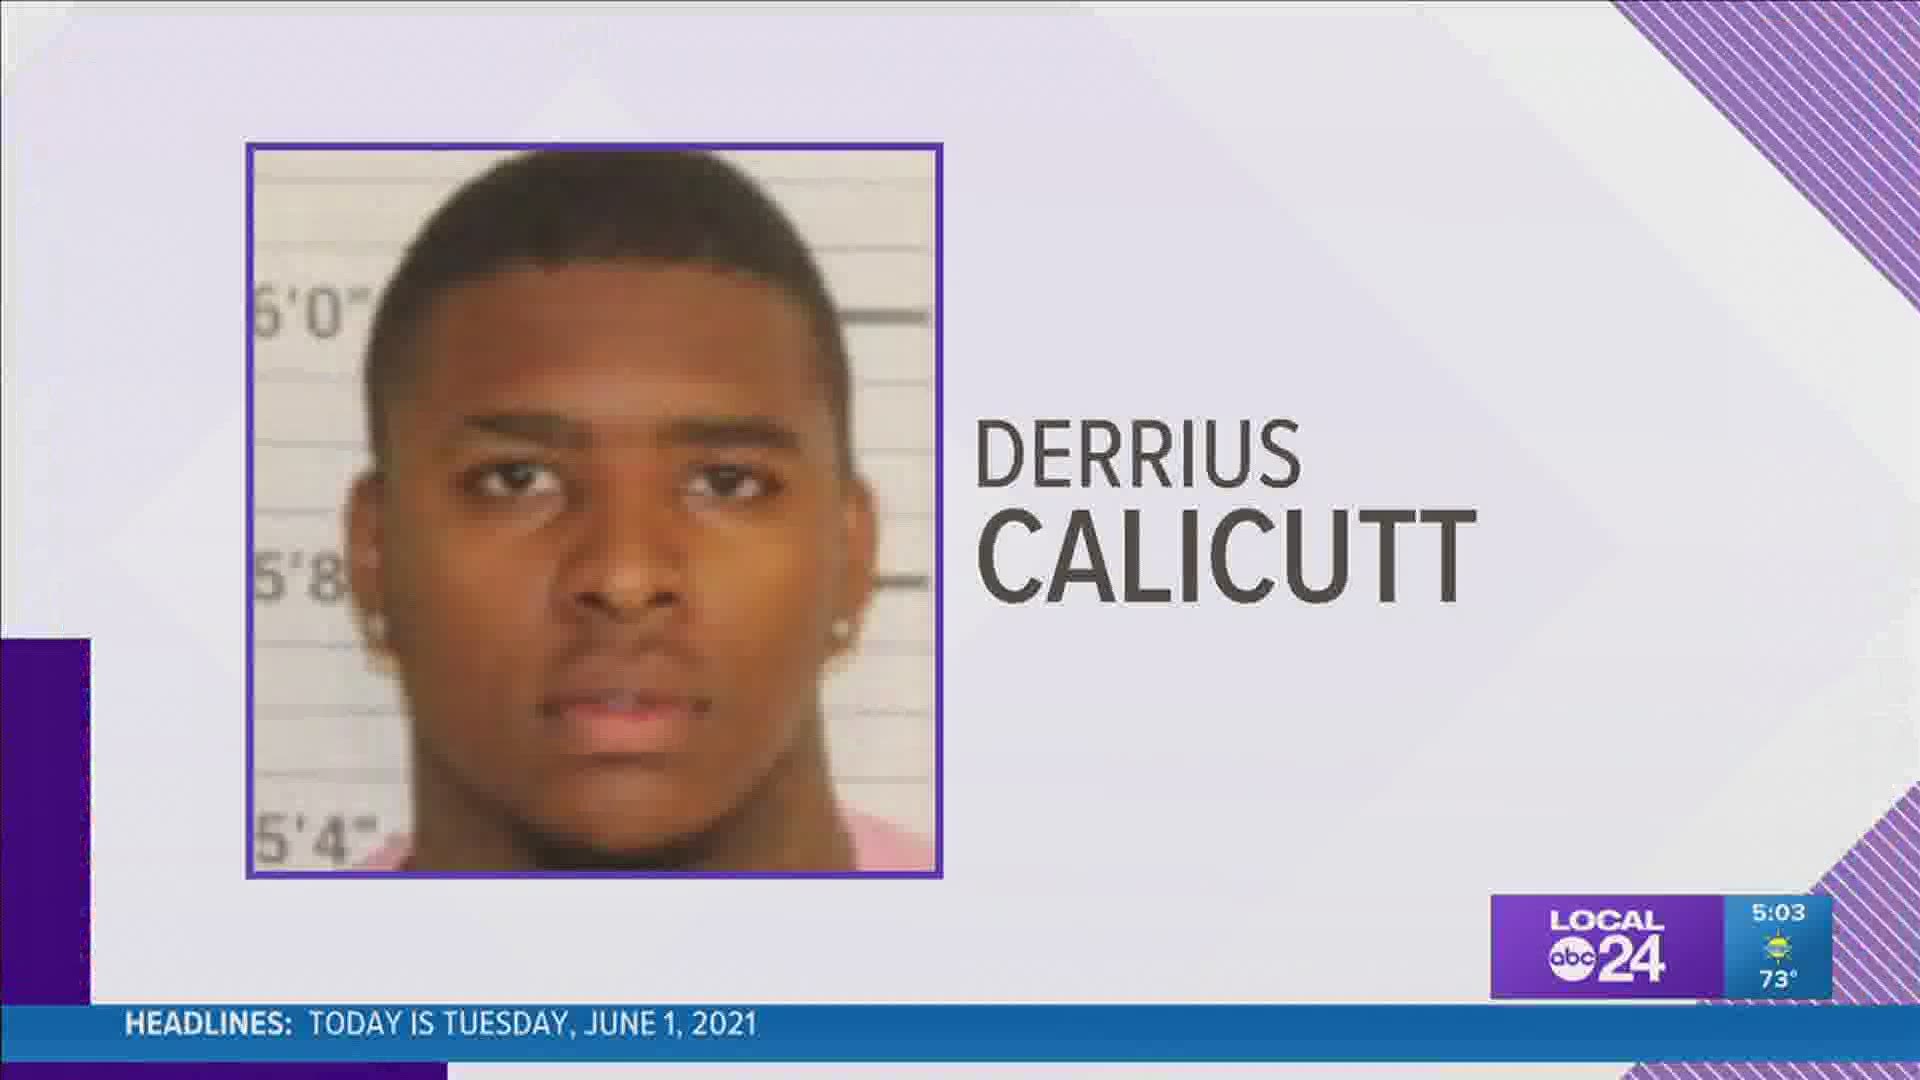 18-year-old Derrius Calicutt was arrested and charged with Violation of Financial Law and No Driver License.